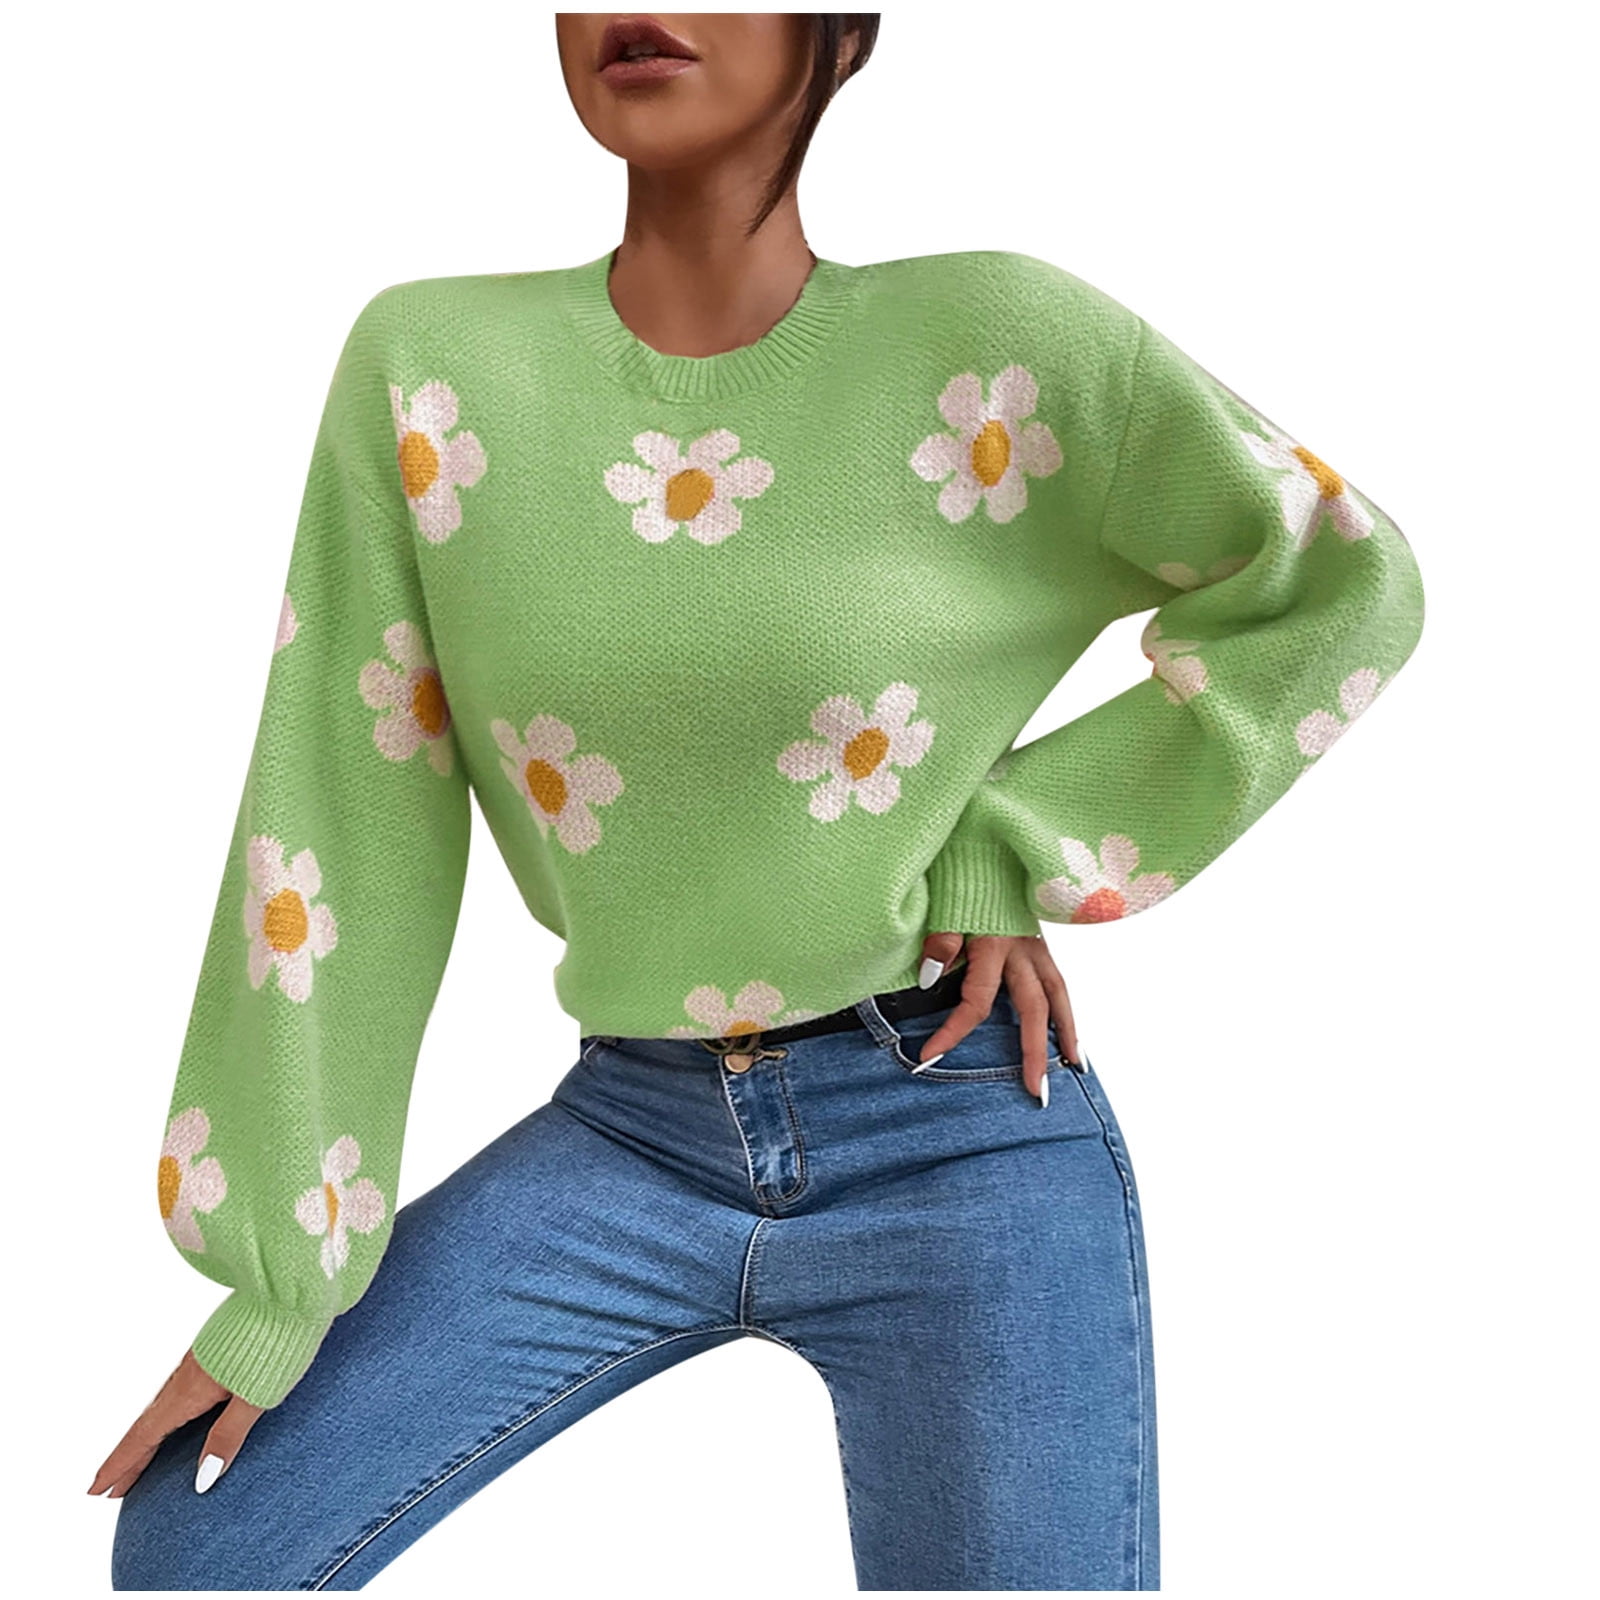 HAPIMO Rollbacks Womens Knit Sweater Fall Fashion Floral Print Long Sleeve  Crewneck Loose Blouse Casual Kawaii Oversized Sweater Teen Girls Clothes  Green S 